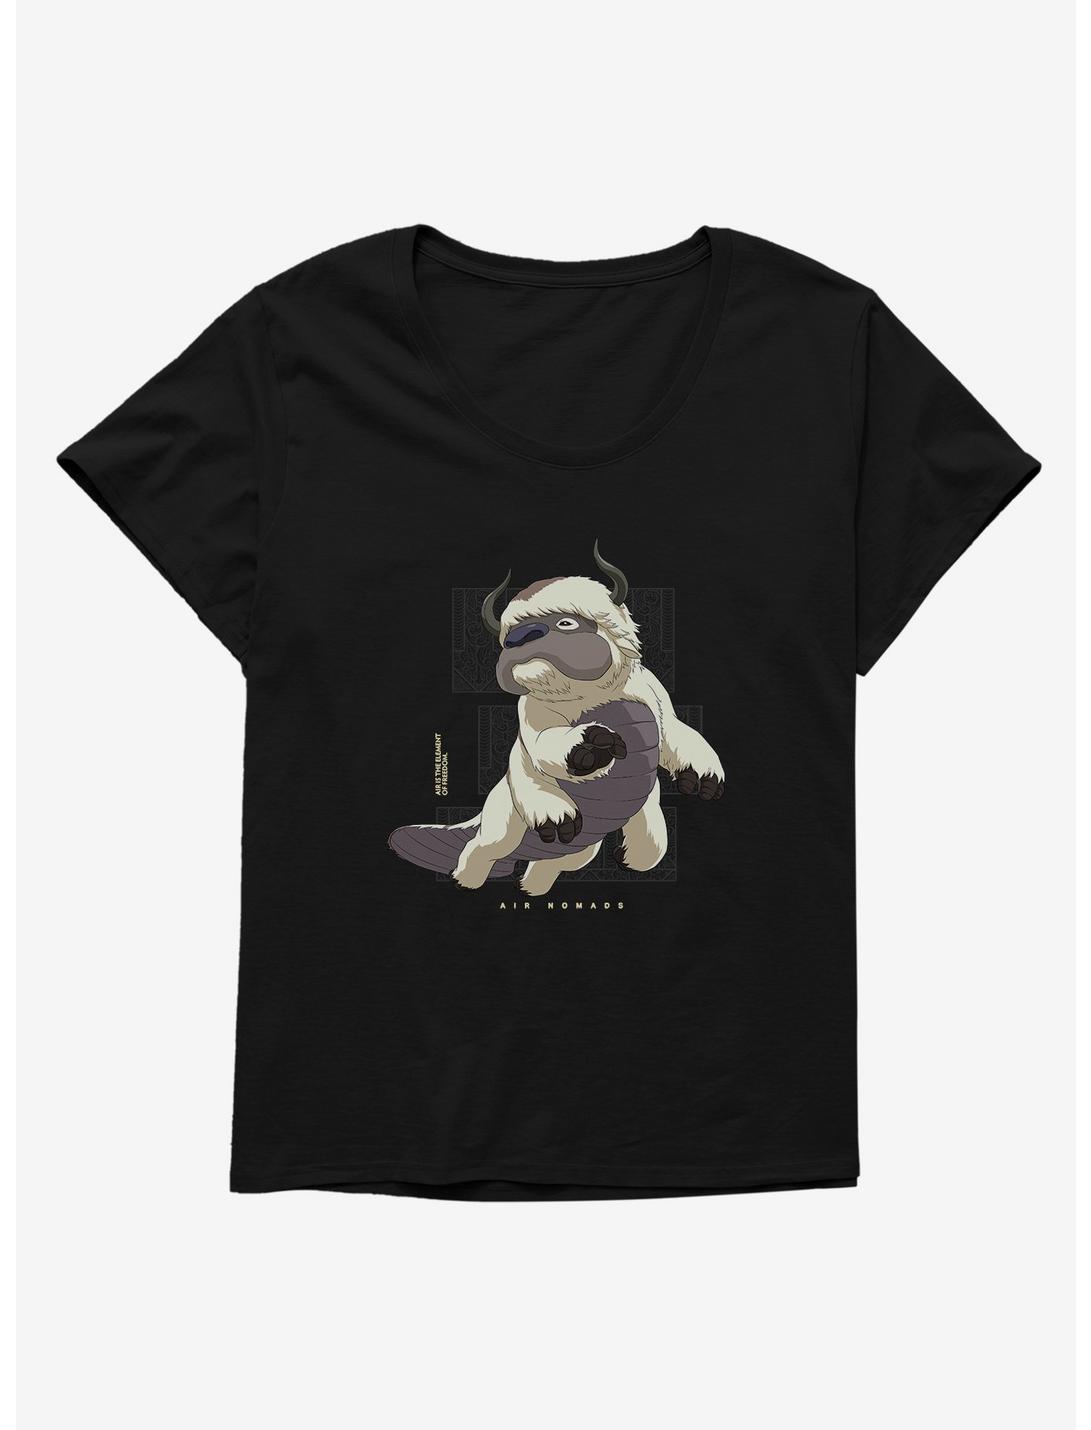 Avatar: The Last Airbender Air Nomads Appa Girls T-Shirt Plus Size, , hi-res